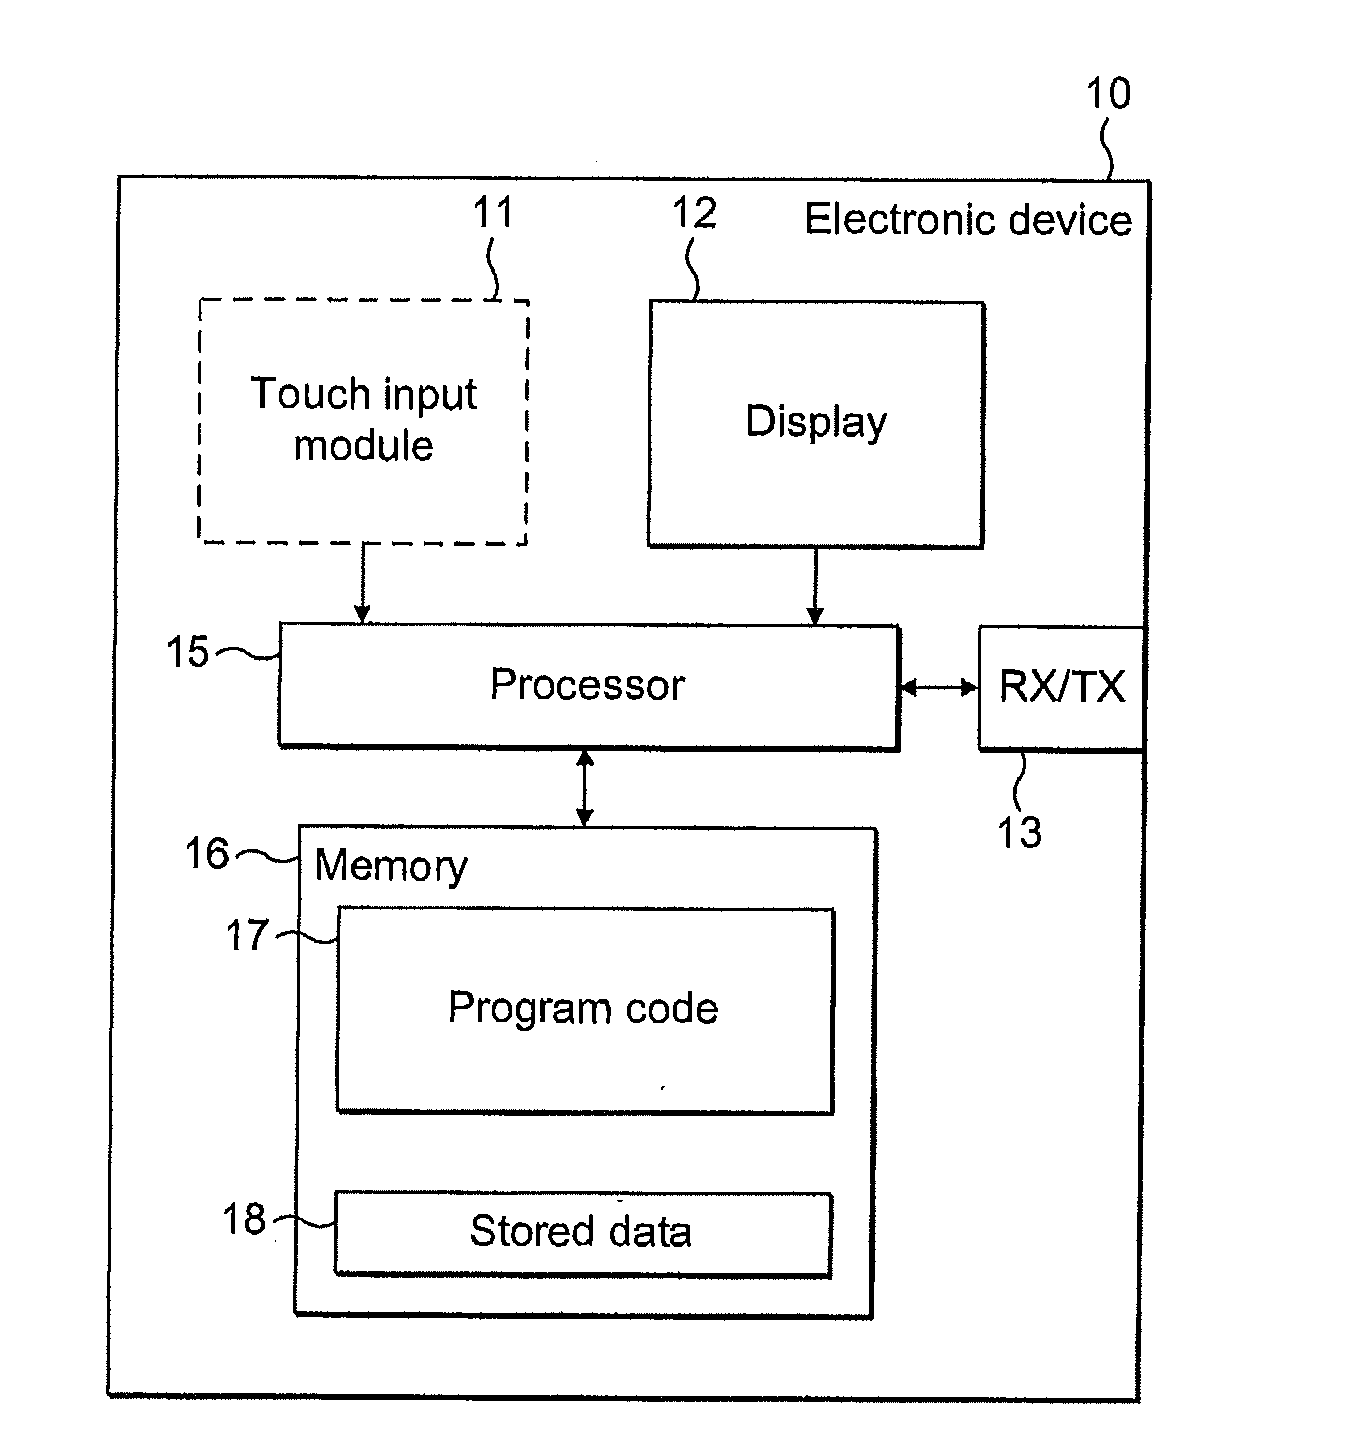 Display apparatus producing audio and haptic output